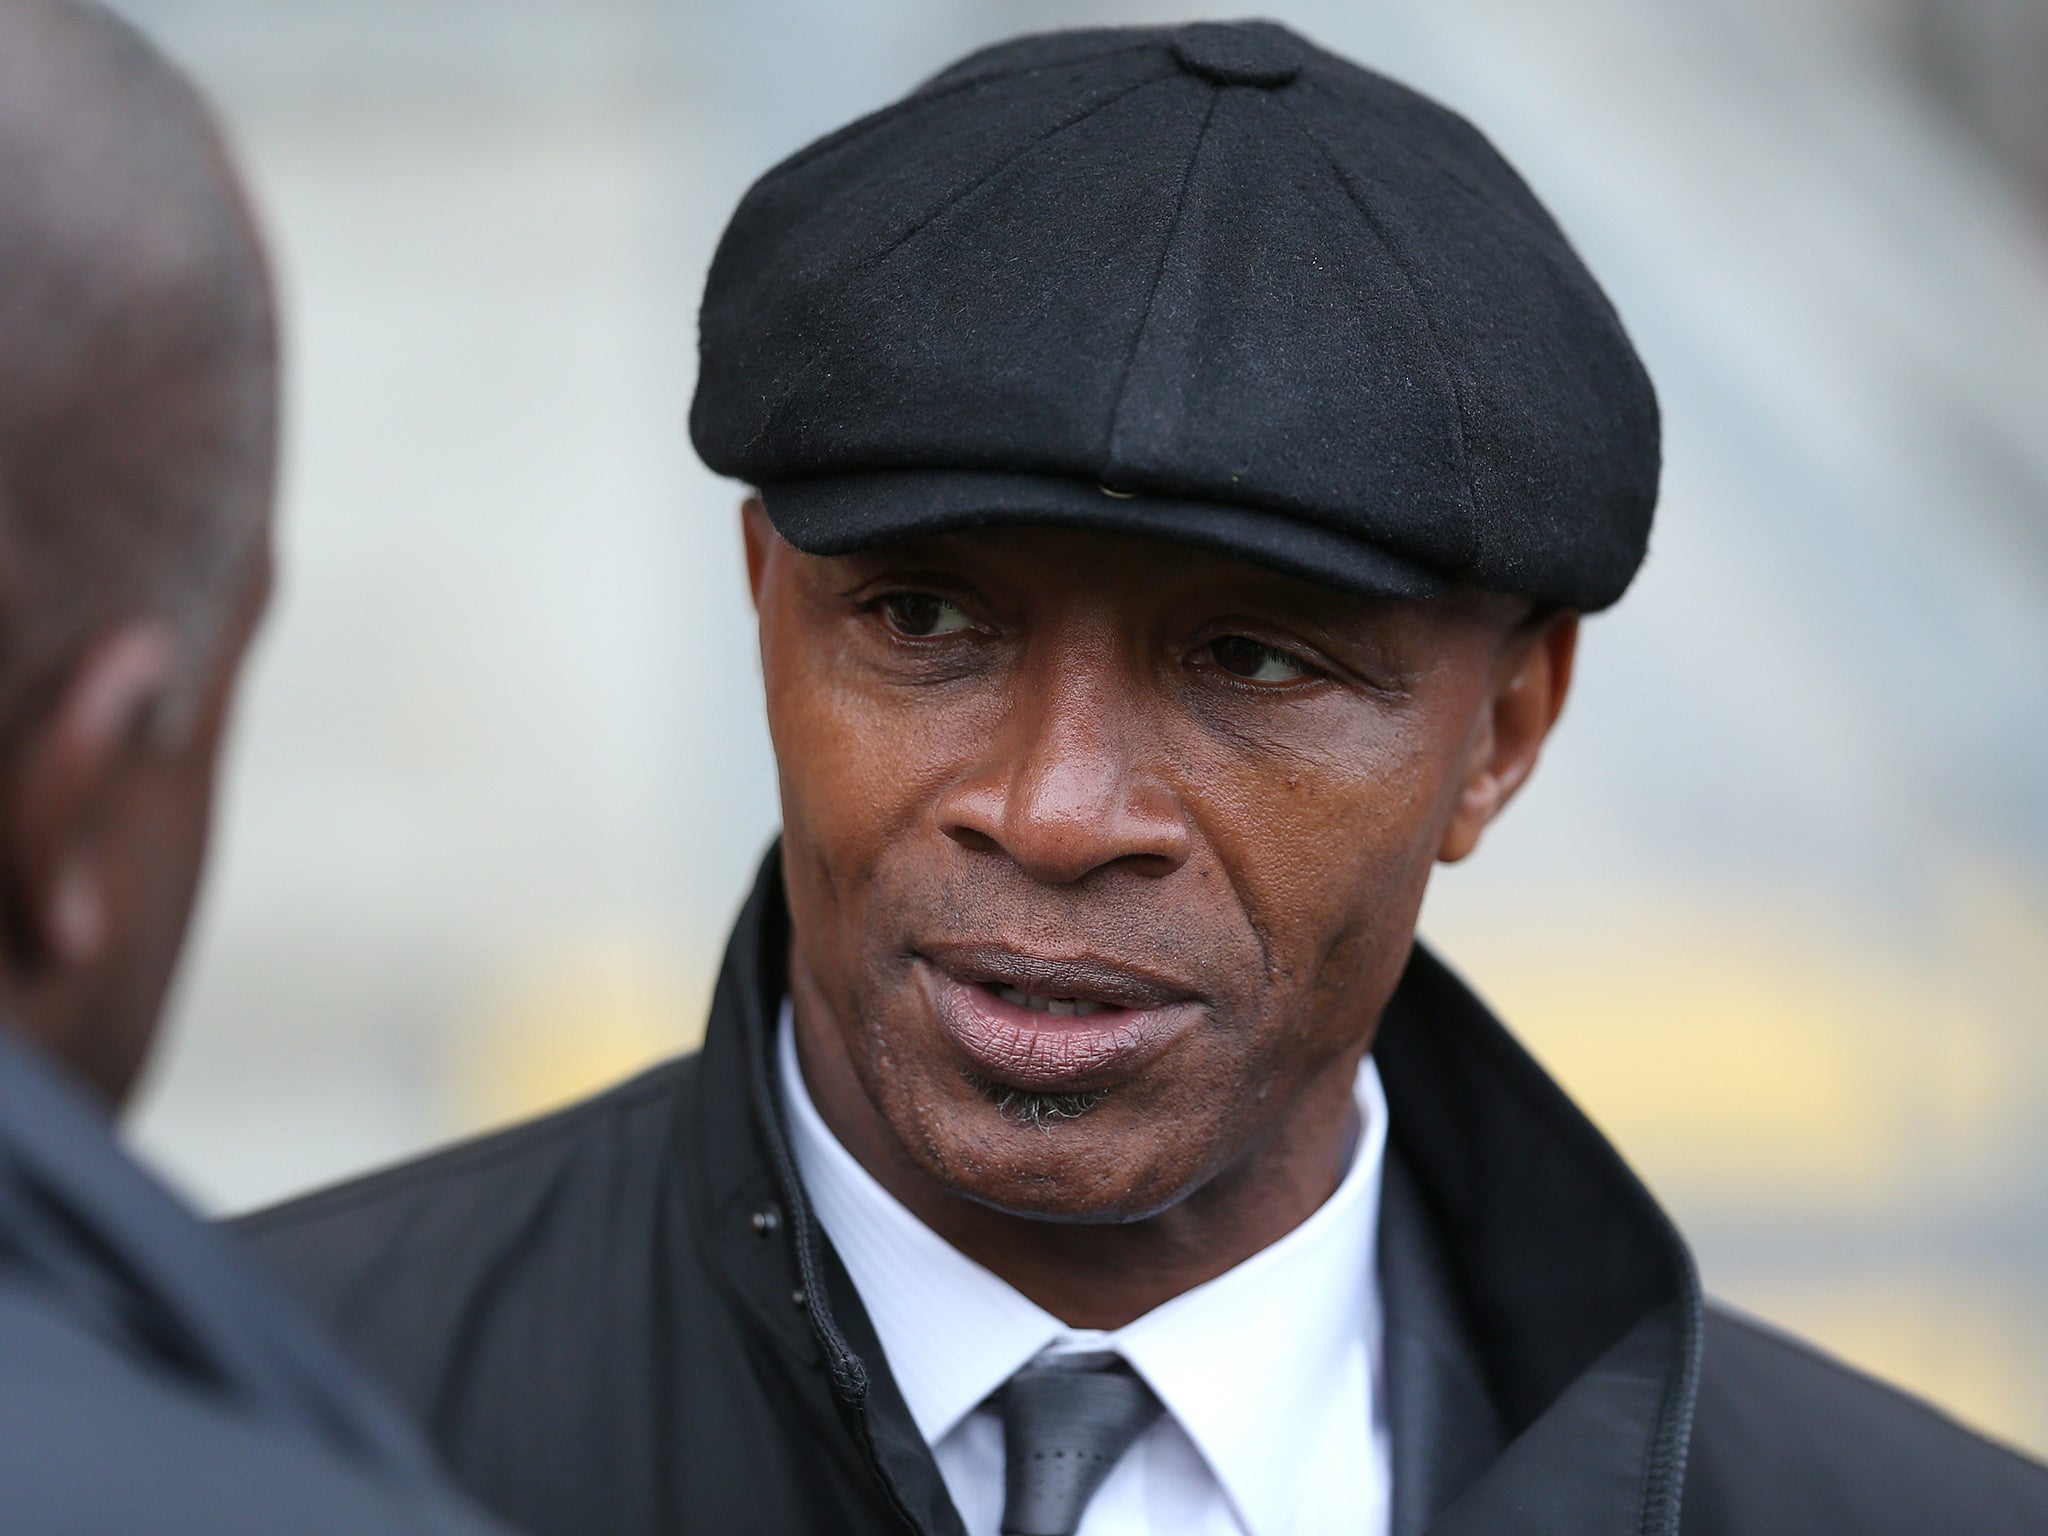 Cyrille Regis has died at the aged of 59 after a suspected heart attack